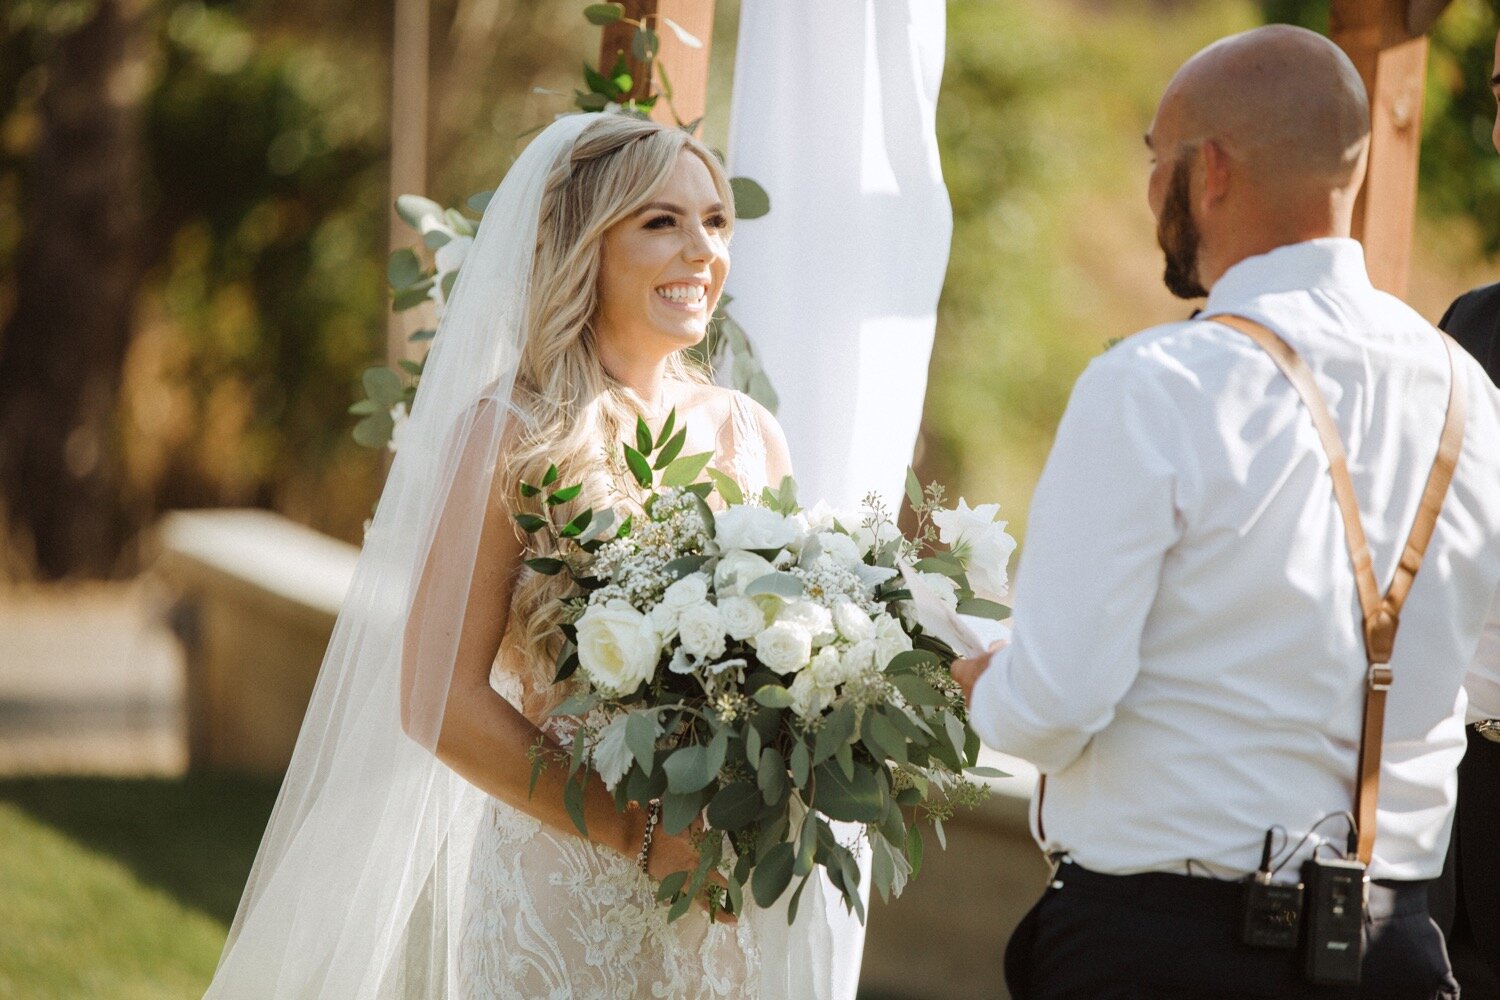 groom reads vows to his bride as she smiles at him at their higuera ranch wedding. california wedding photographer